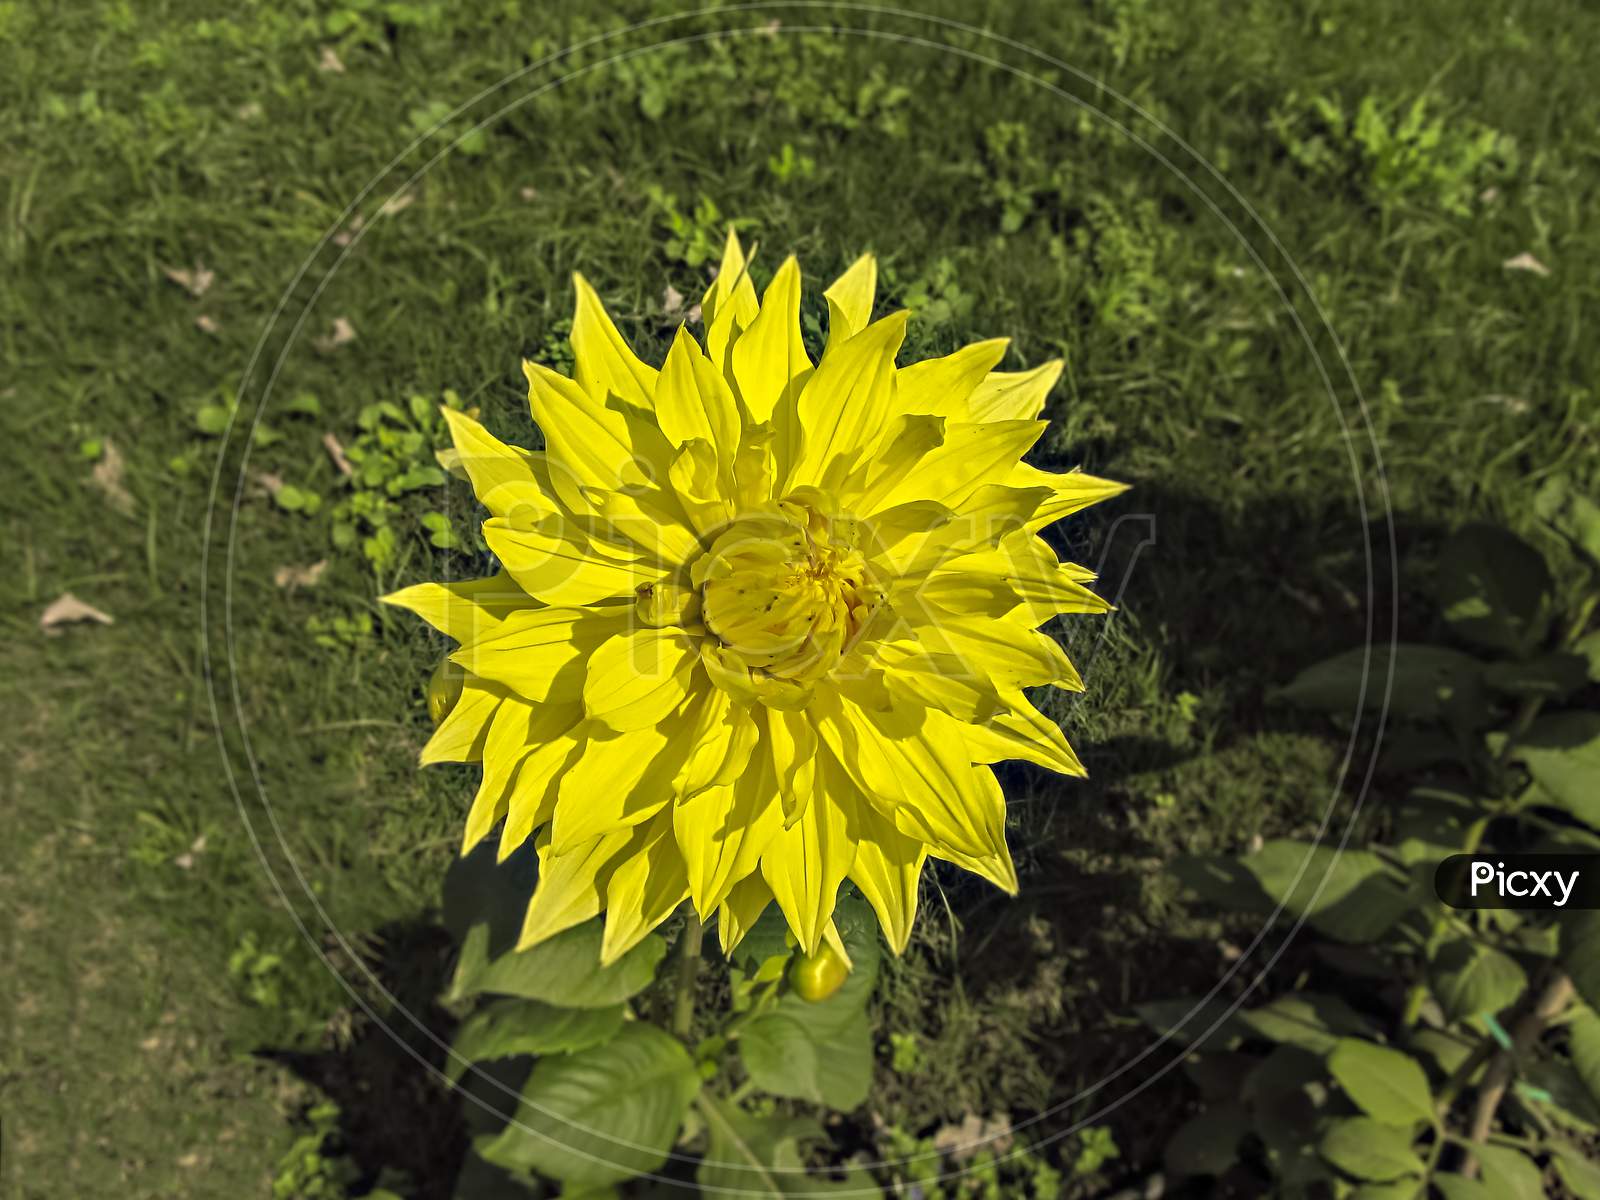 Selective Focus, Blur Background, Close Up Of Bright Yellow Dahlia Flower In Park.